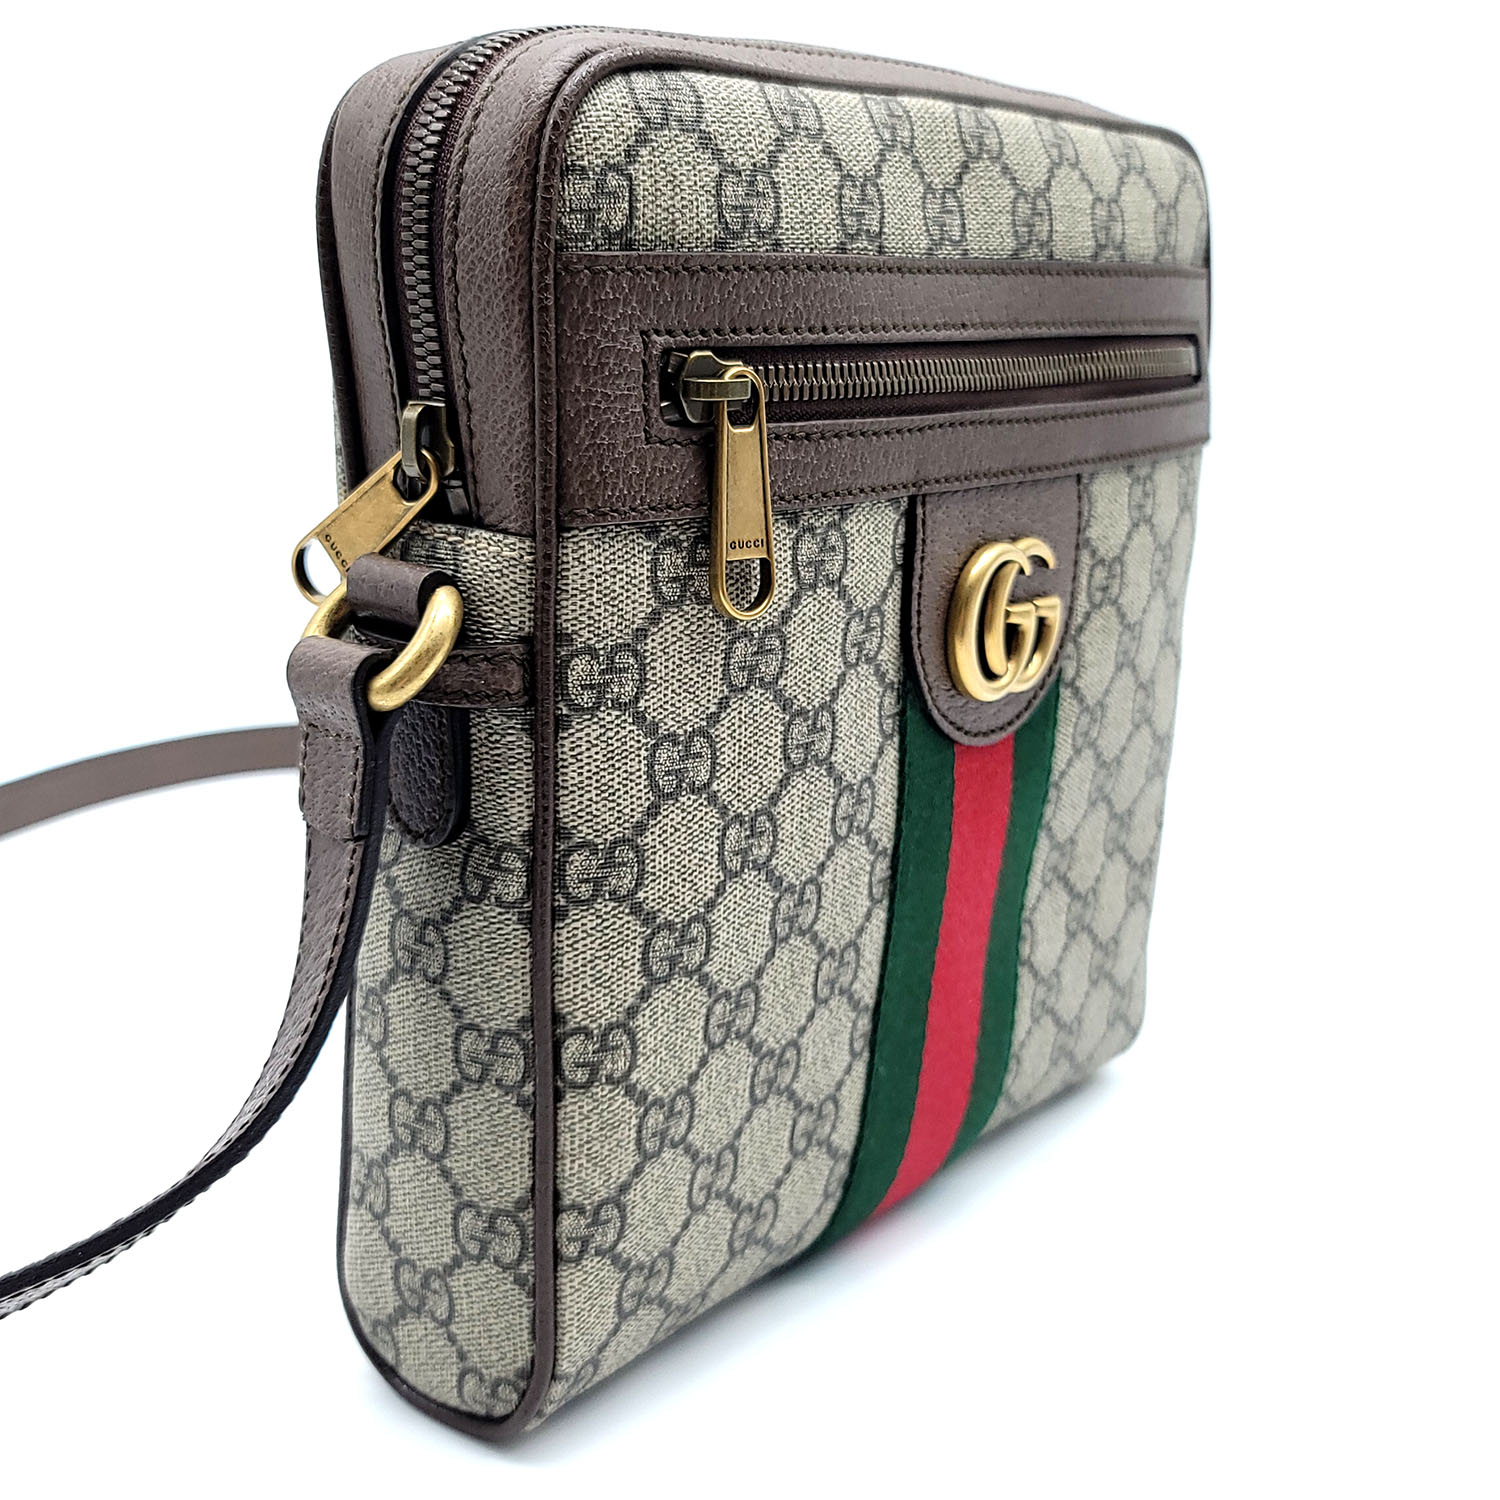 Gucci Ophidia GG small messenger bag #客訂商品實拍Ophidia 老花郵差